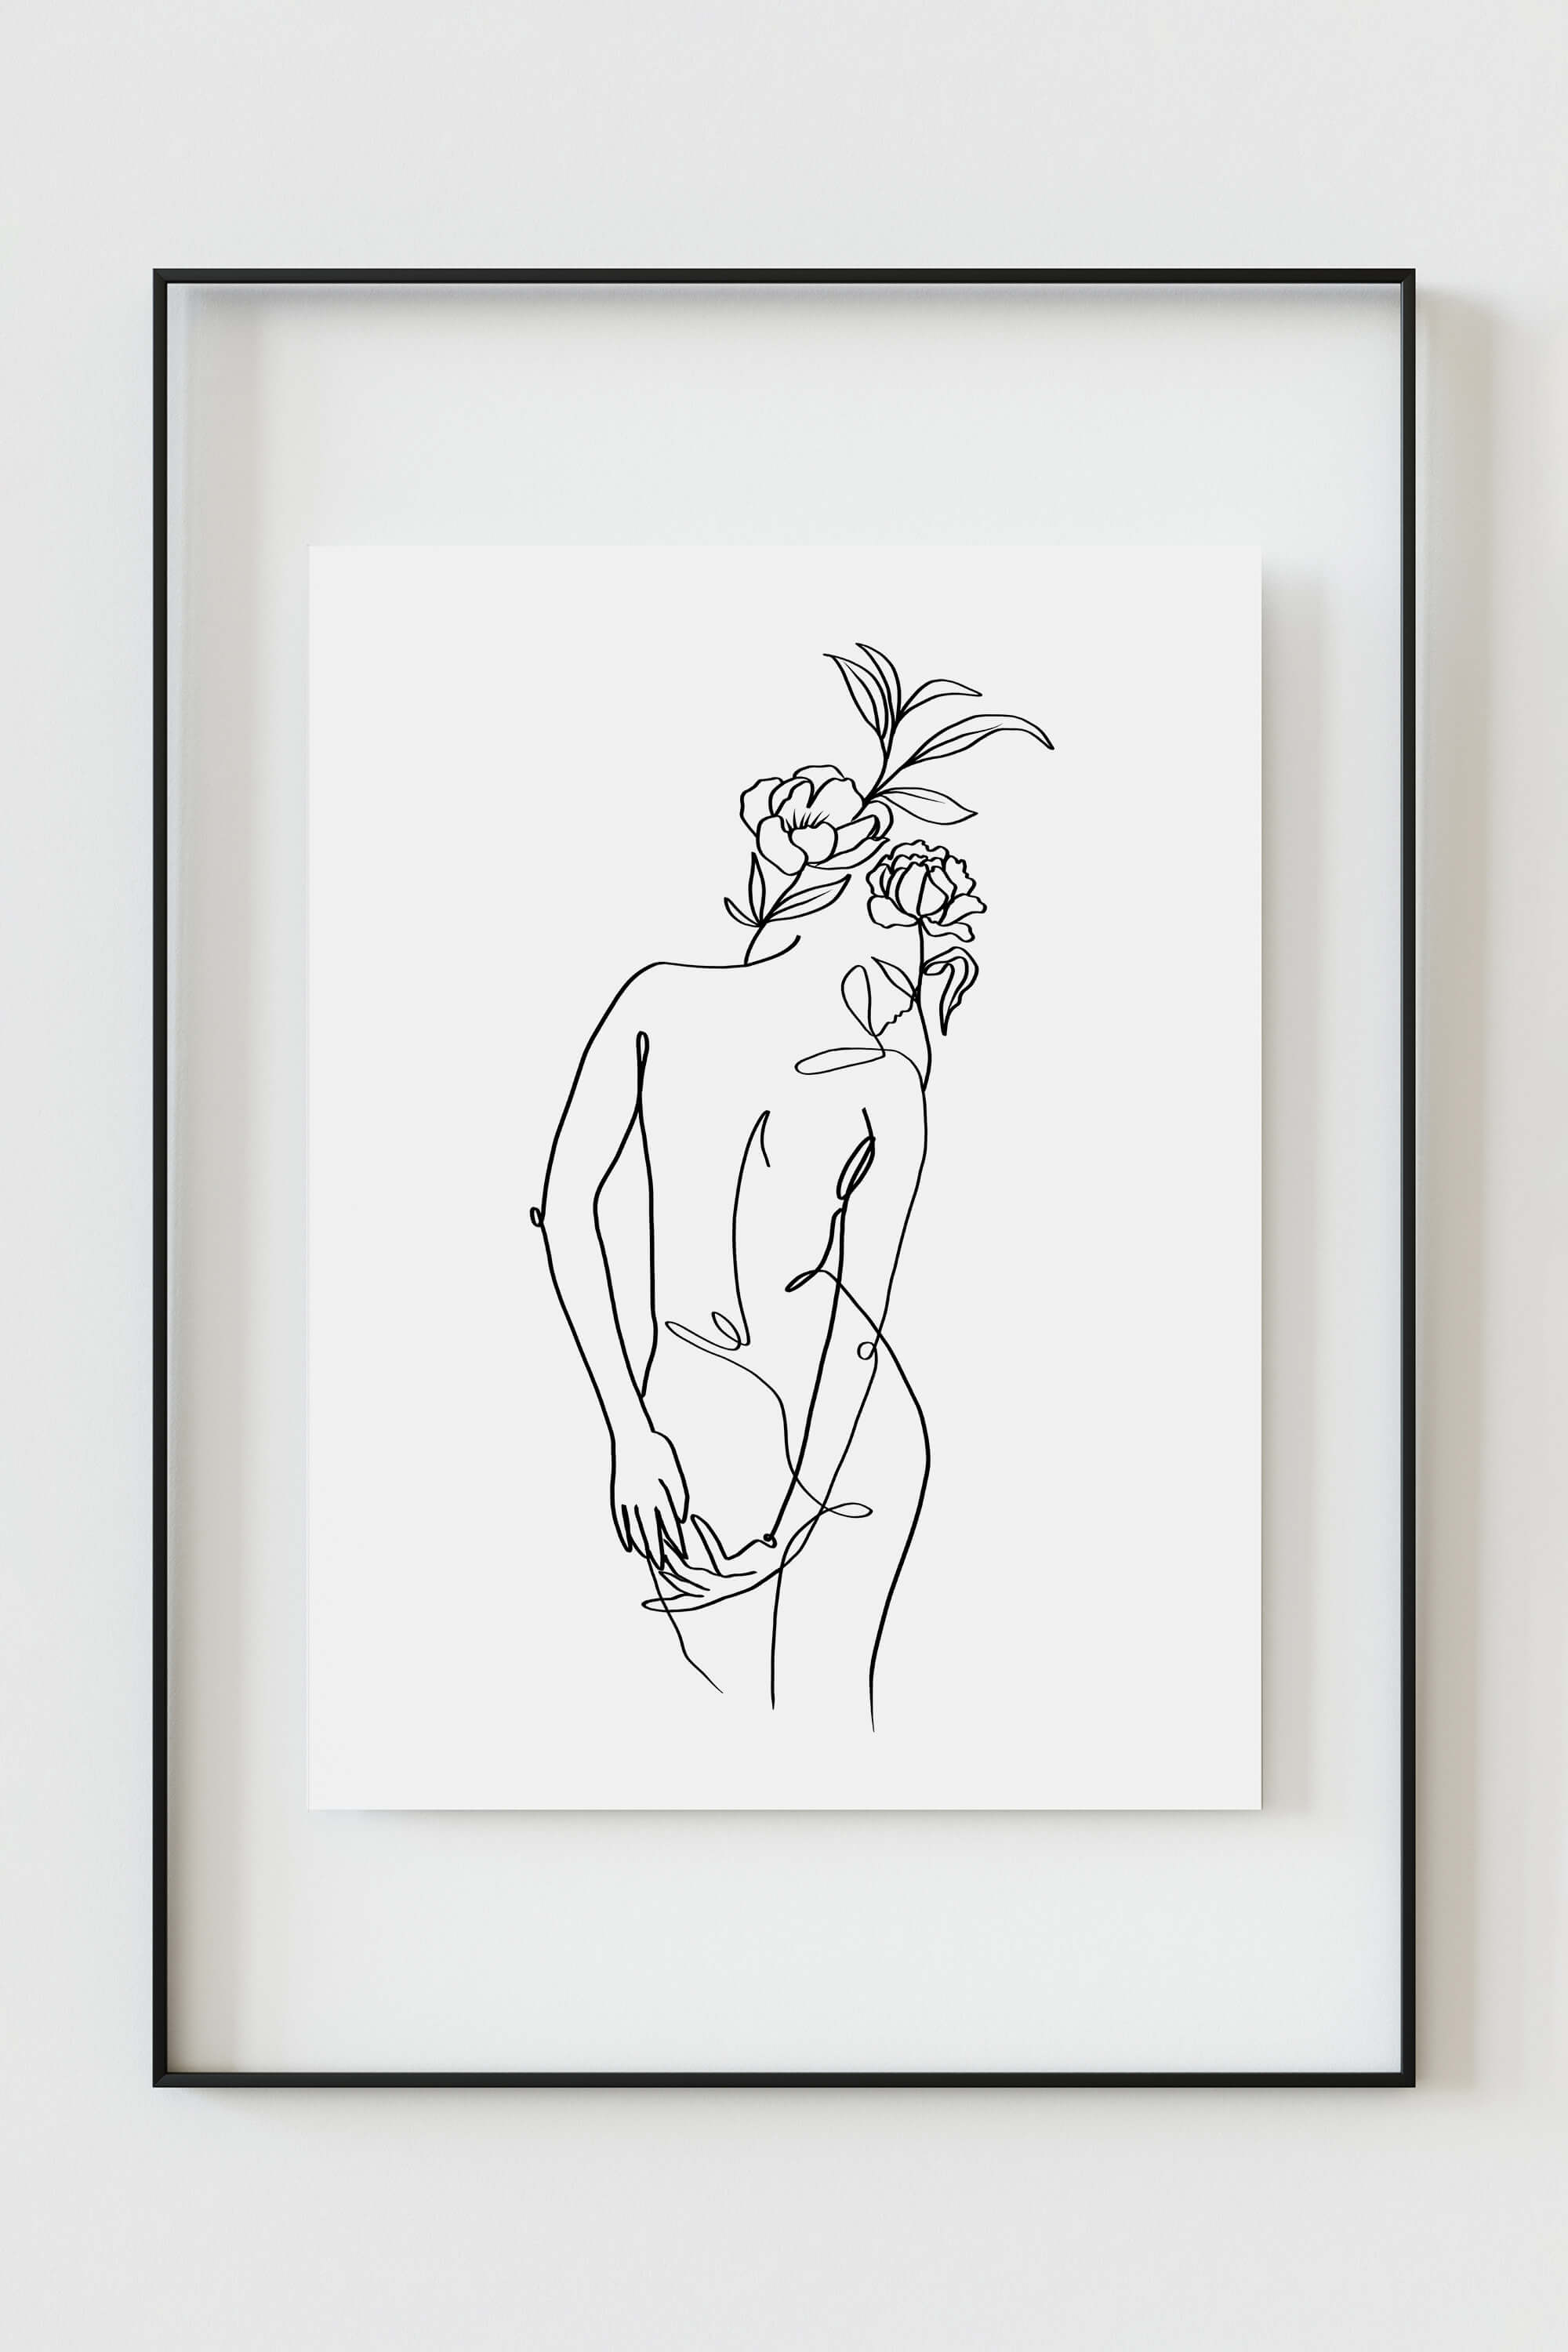 An art print featuring a nude female form, captured in simple yet profound lines against a white background. The monochrome aesthetic emphasizes the beauty of simplicity, making it a striking addition to any contemporary art collection.